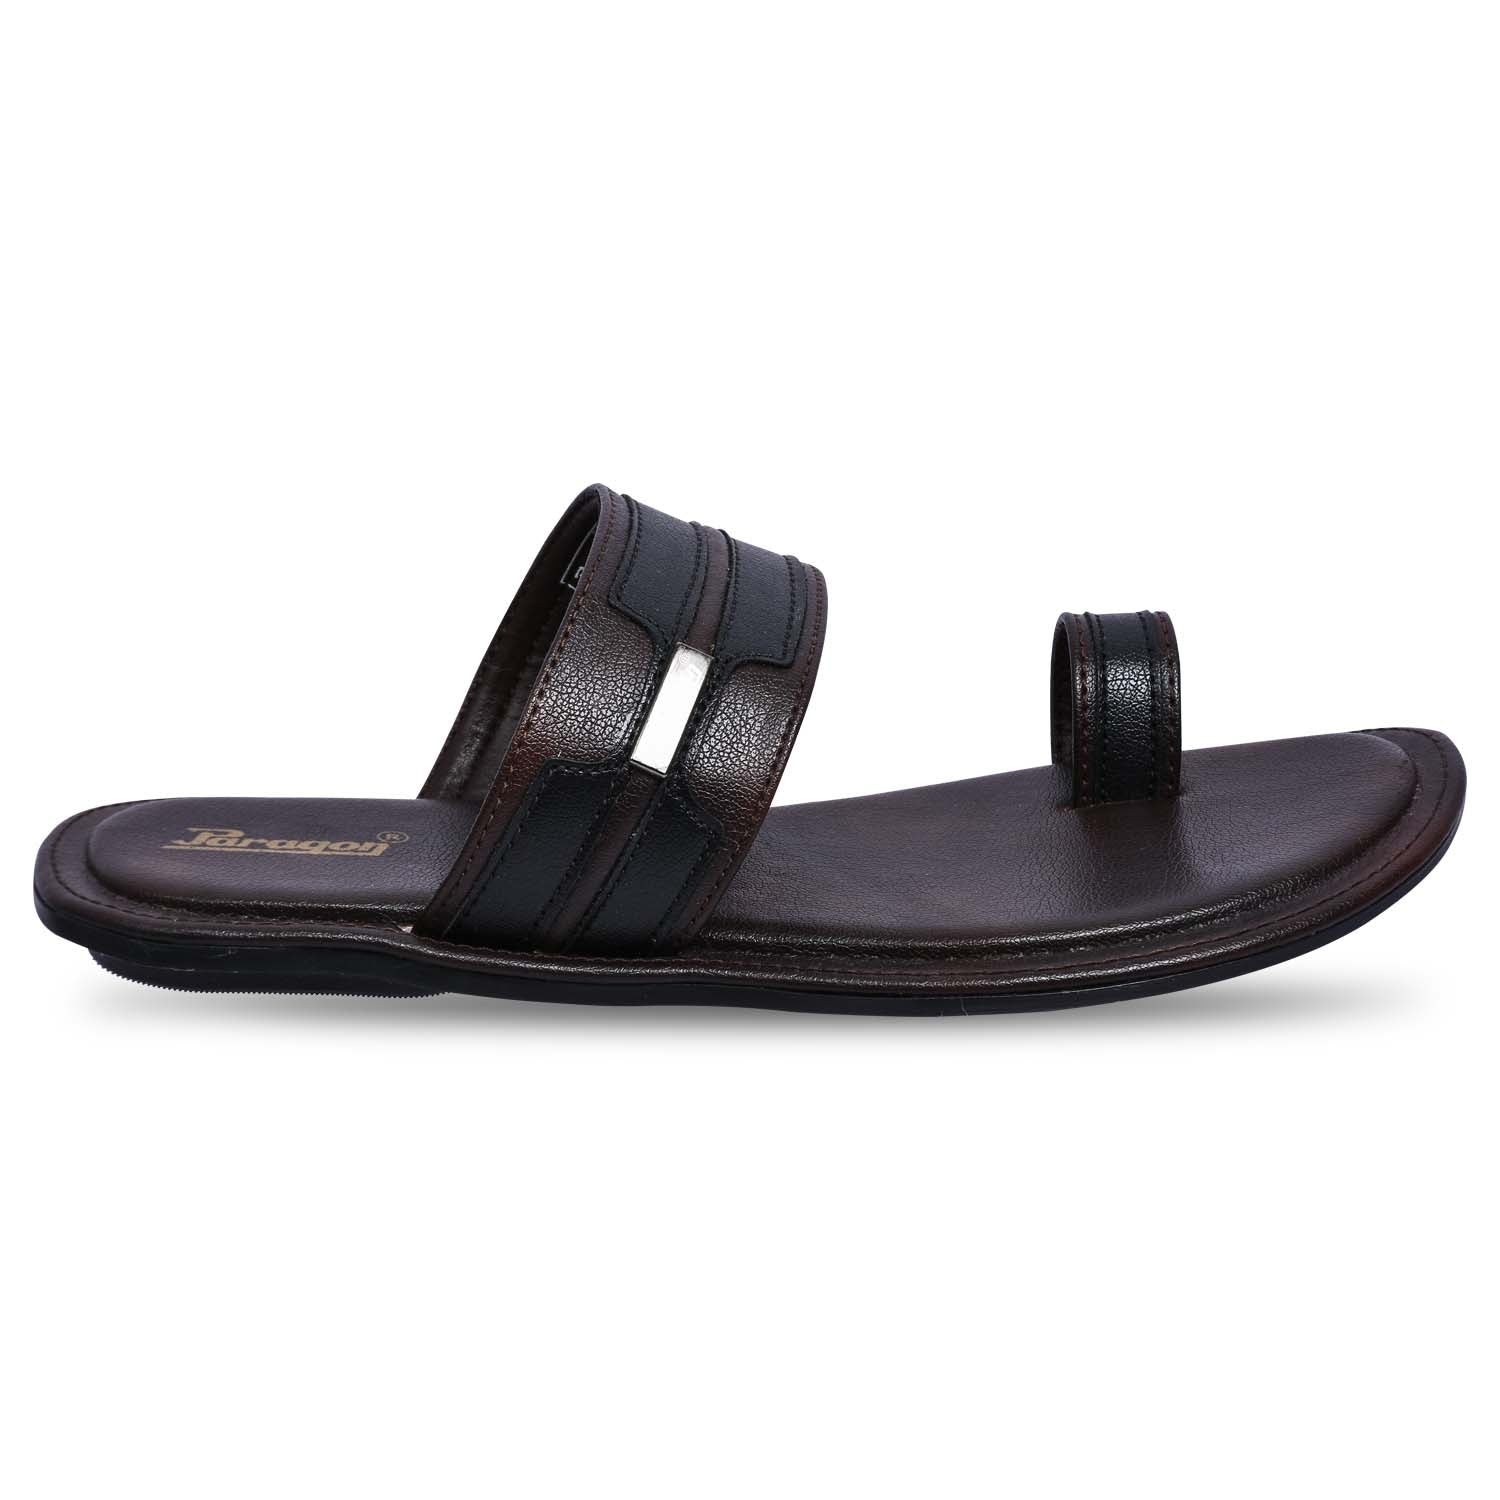 Paragon R4000G Men Stylish Sandals | Comfortable Sandals for Daily Outdoor Use | Casual Formal Sandals with Cushioned Soles